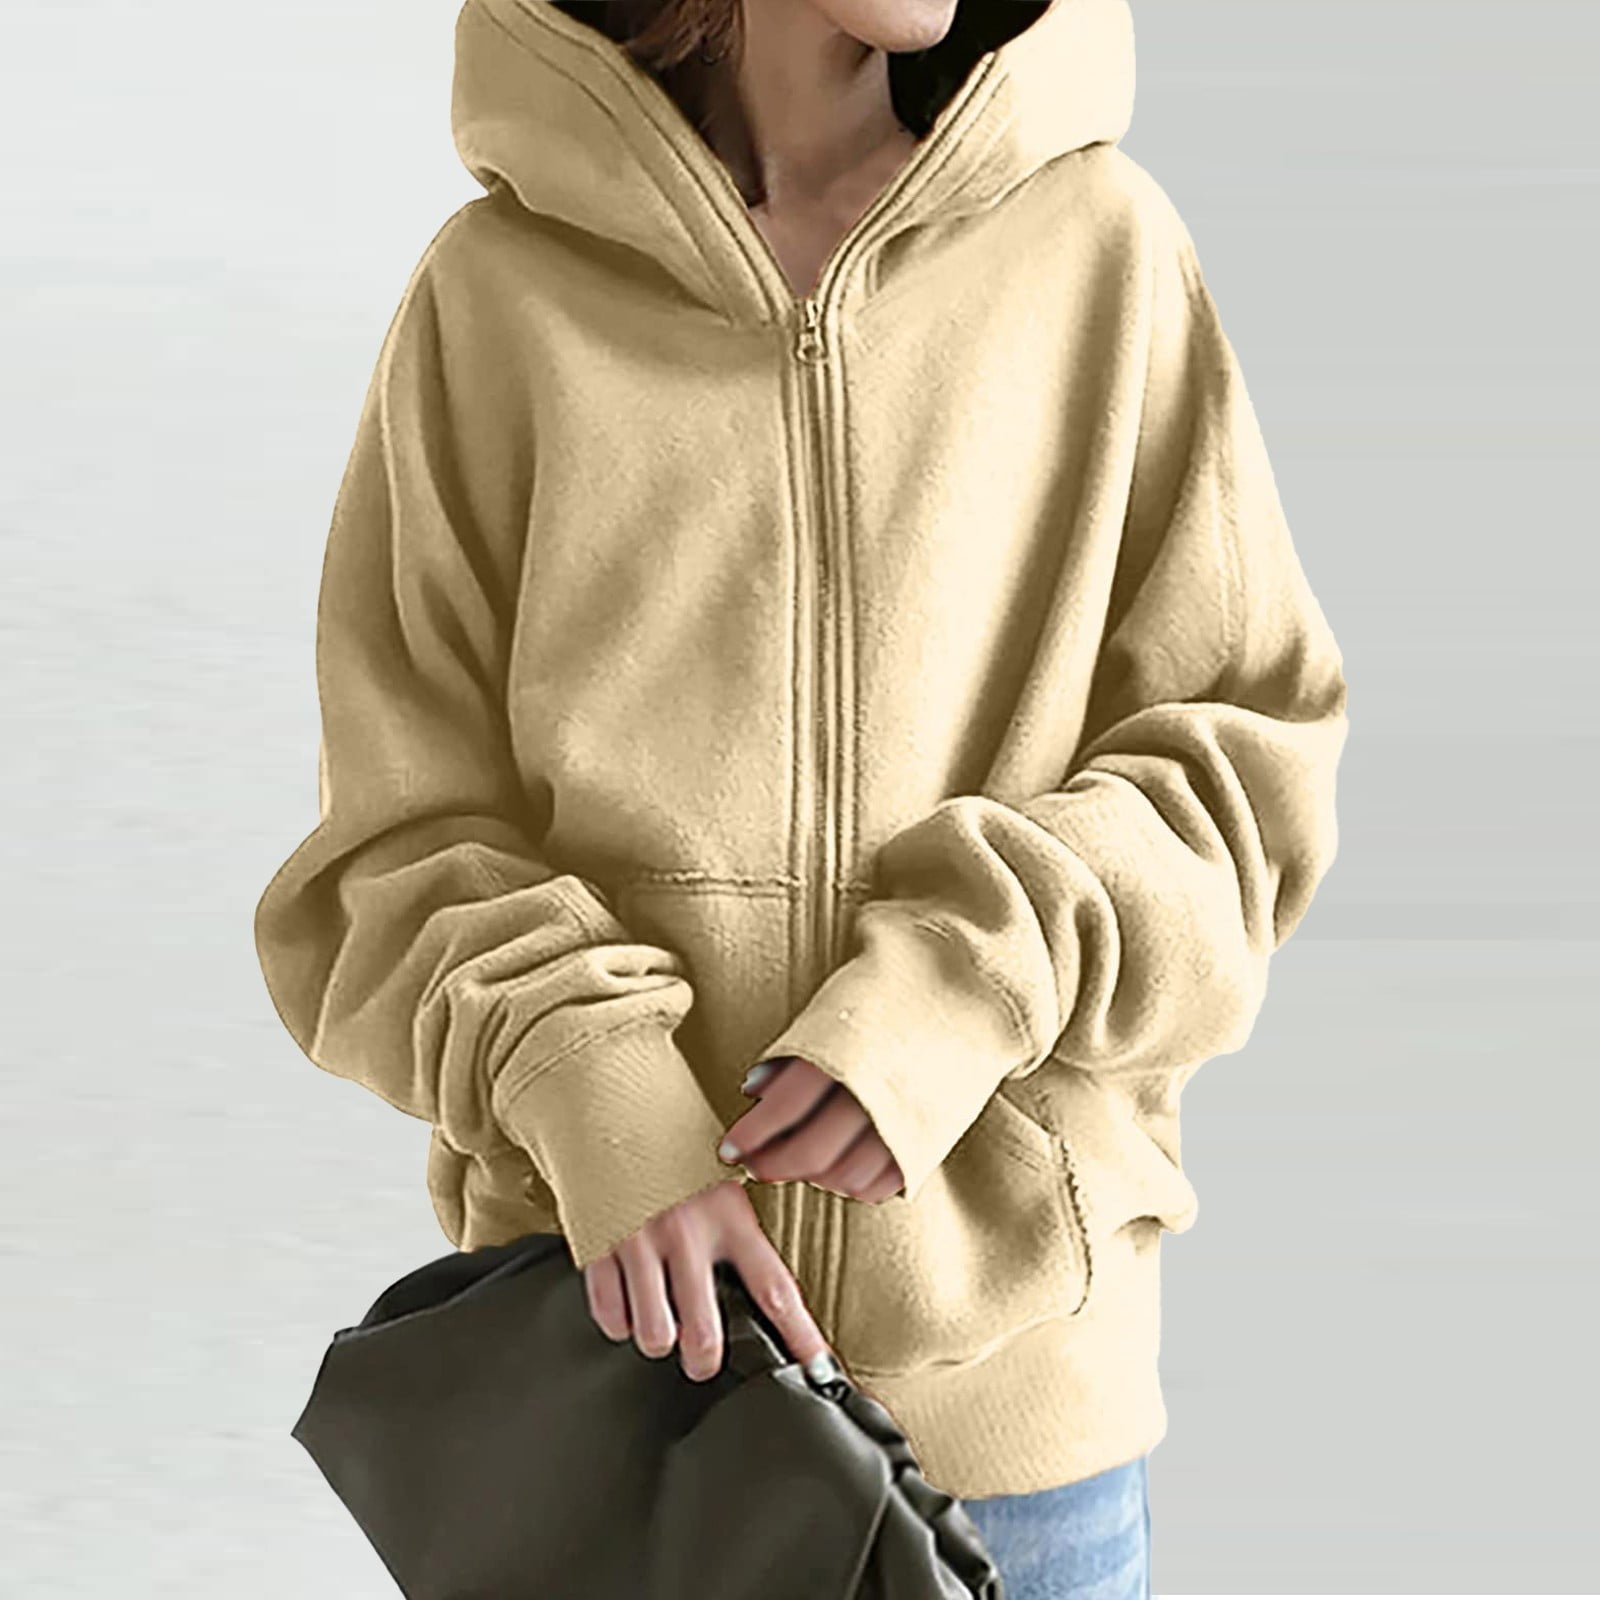 Women's Oversized Zip Up Hoodies Sweatshirts Y2K Clothes Tops Sweaters  Casual Sweatshirts Comfy Fall Fashion Outfits at  Women's Clothing  store